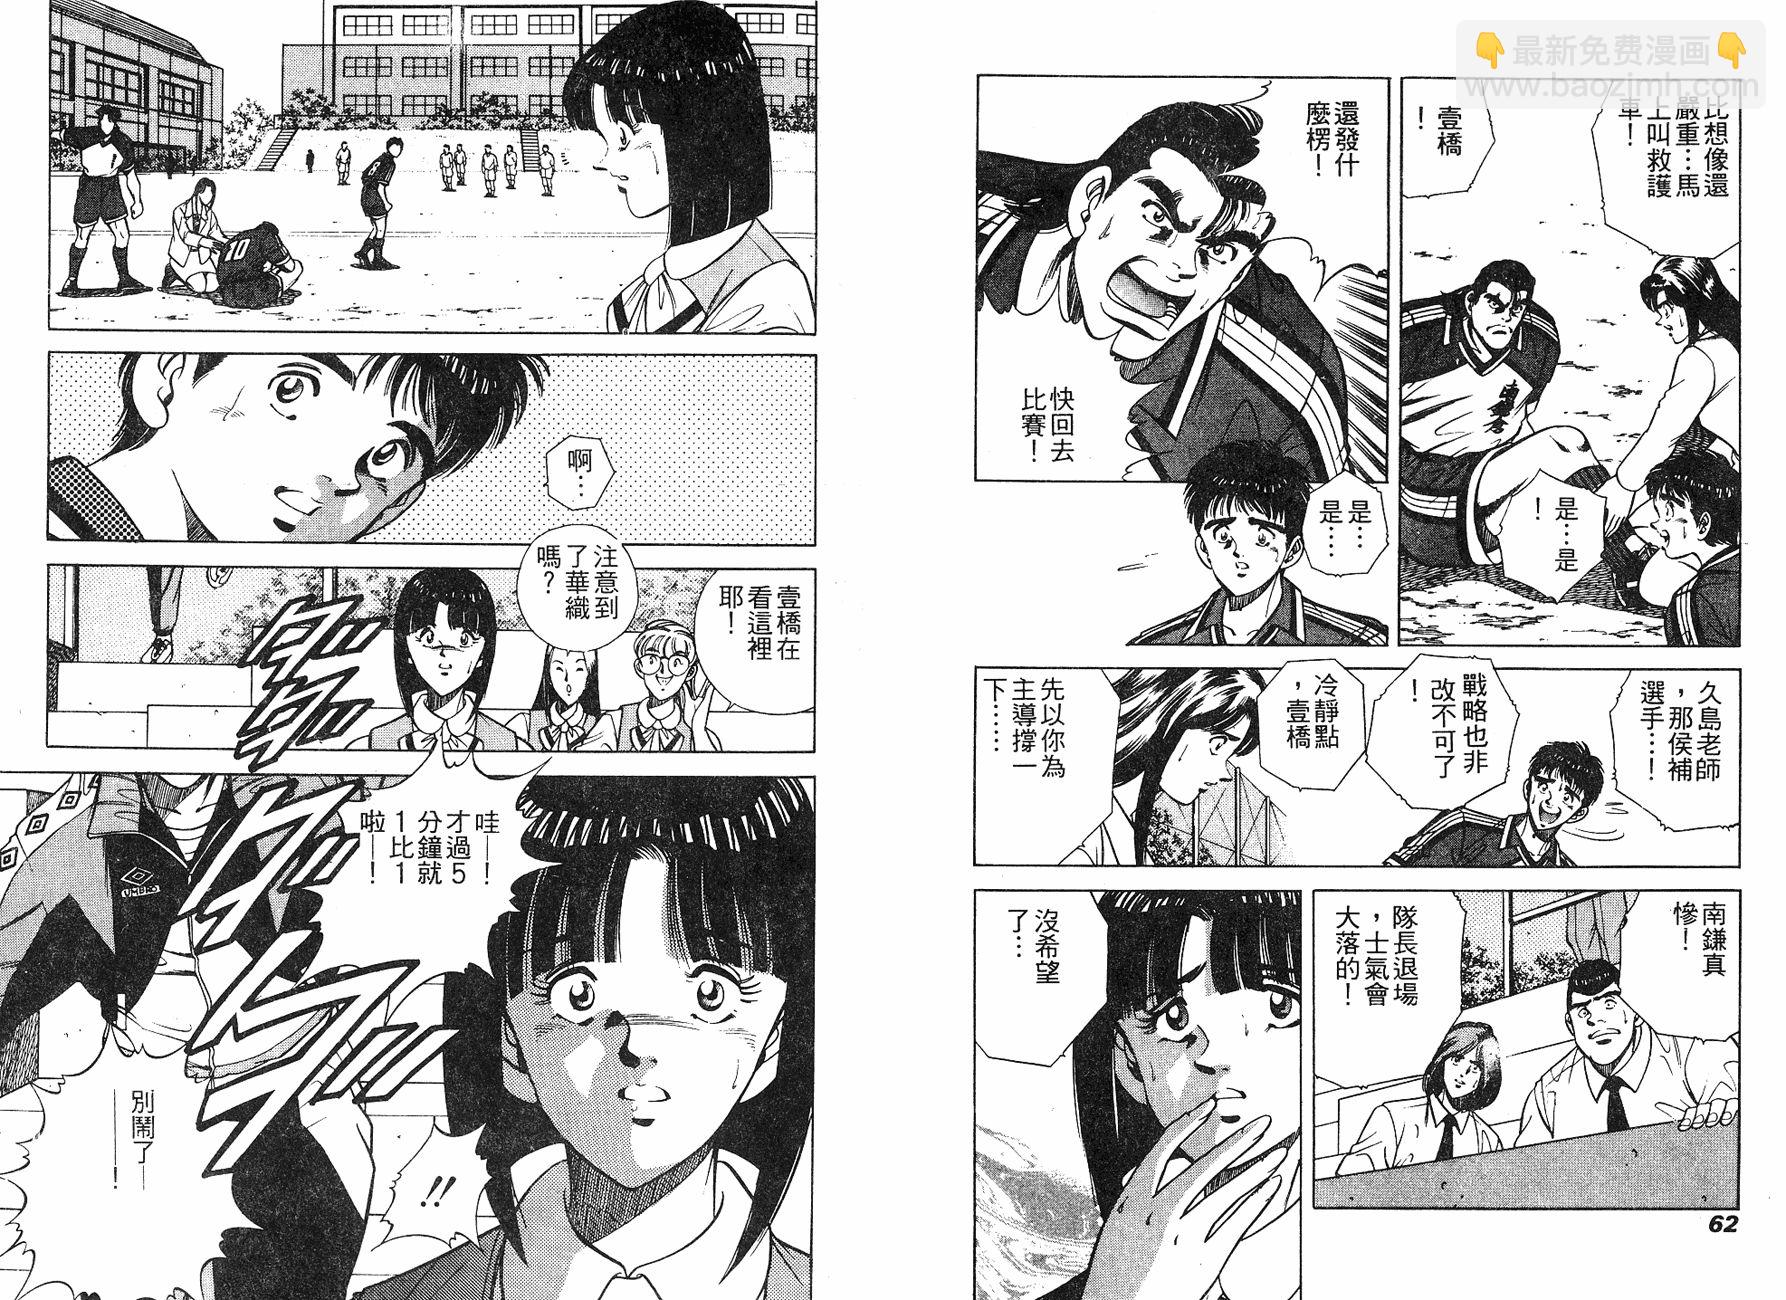 Two Top - 第04卷(1/2) - 1